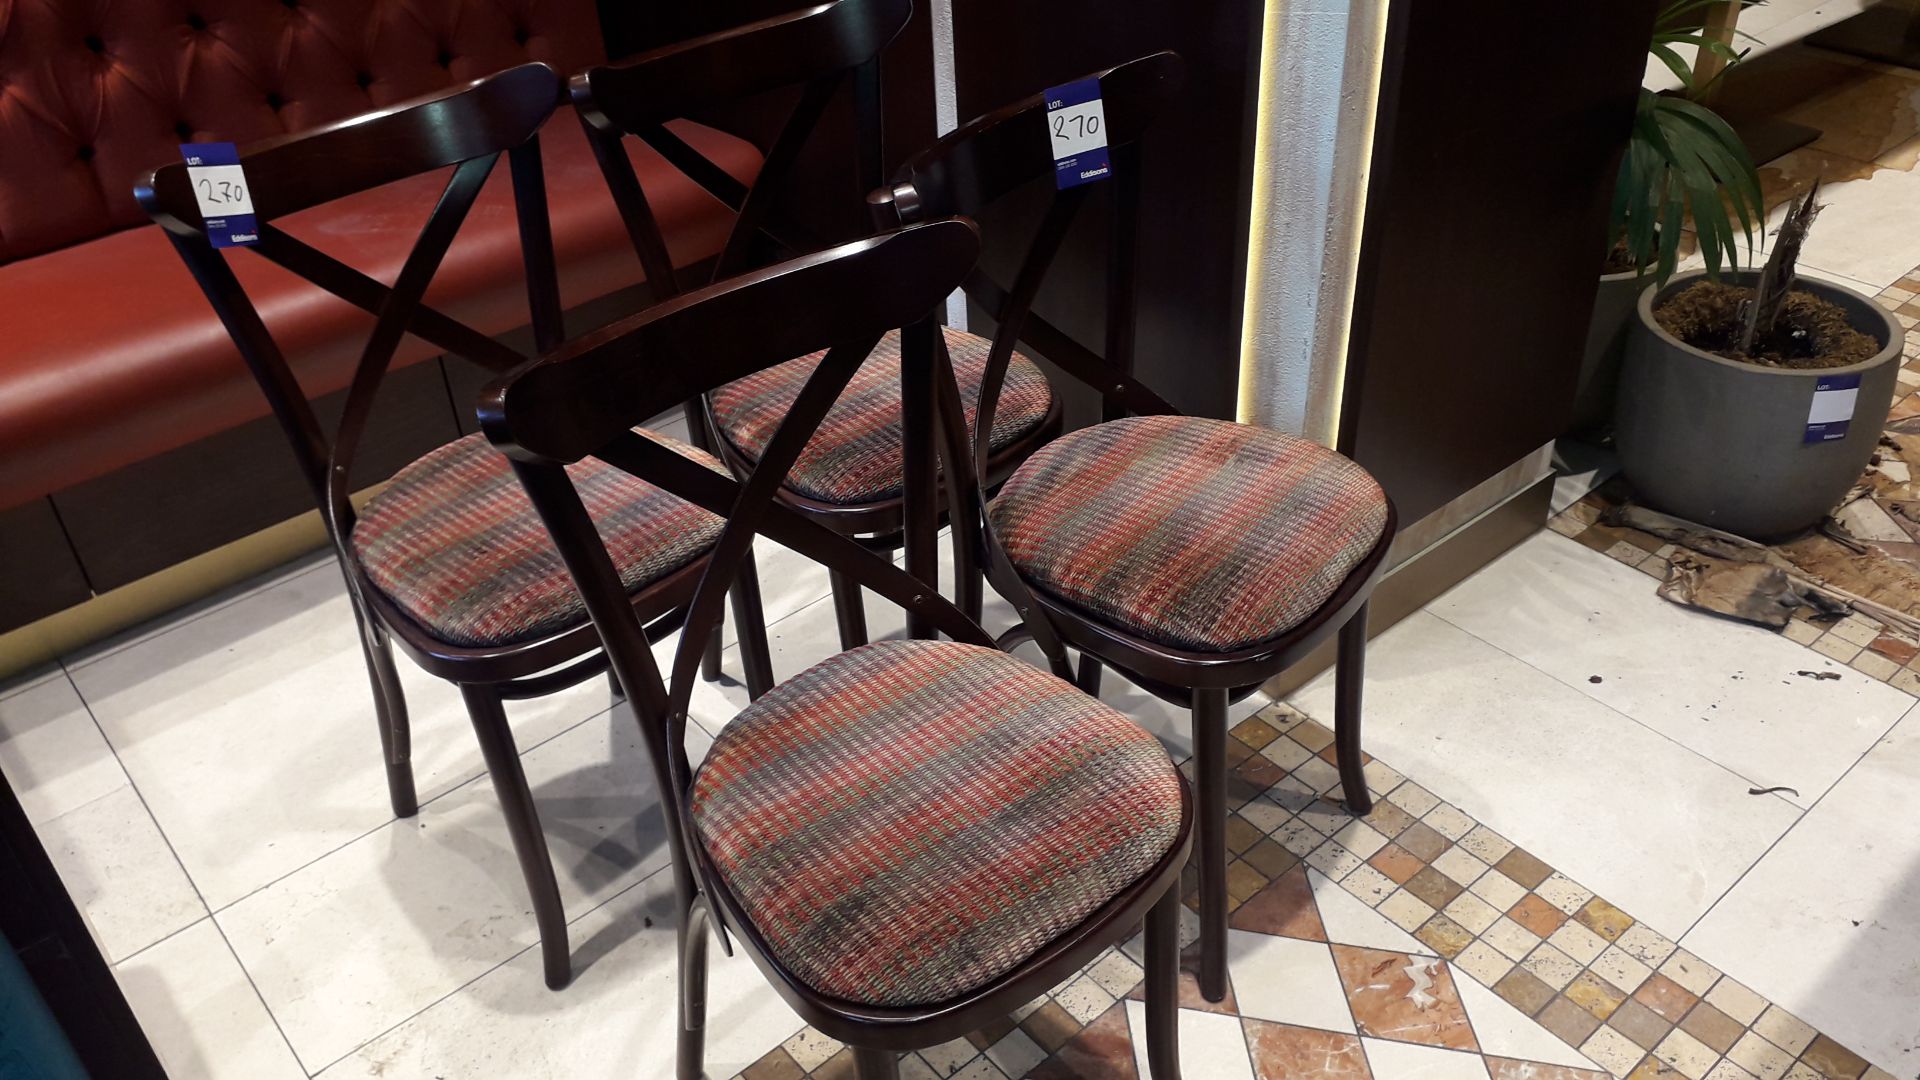 Set of 4 Wooden Chairs Upholstered Seats, Located at First Floor, The Bentall Centre, Wood Street,